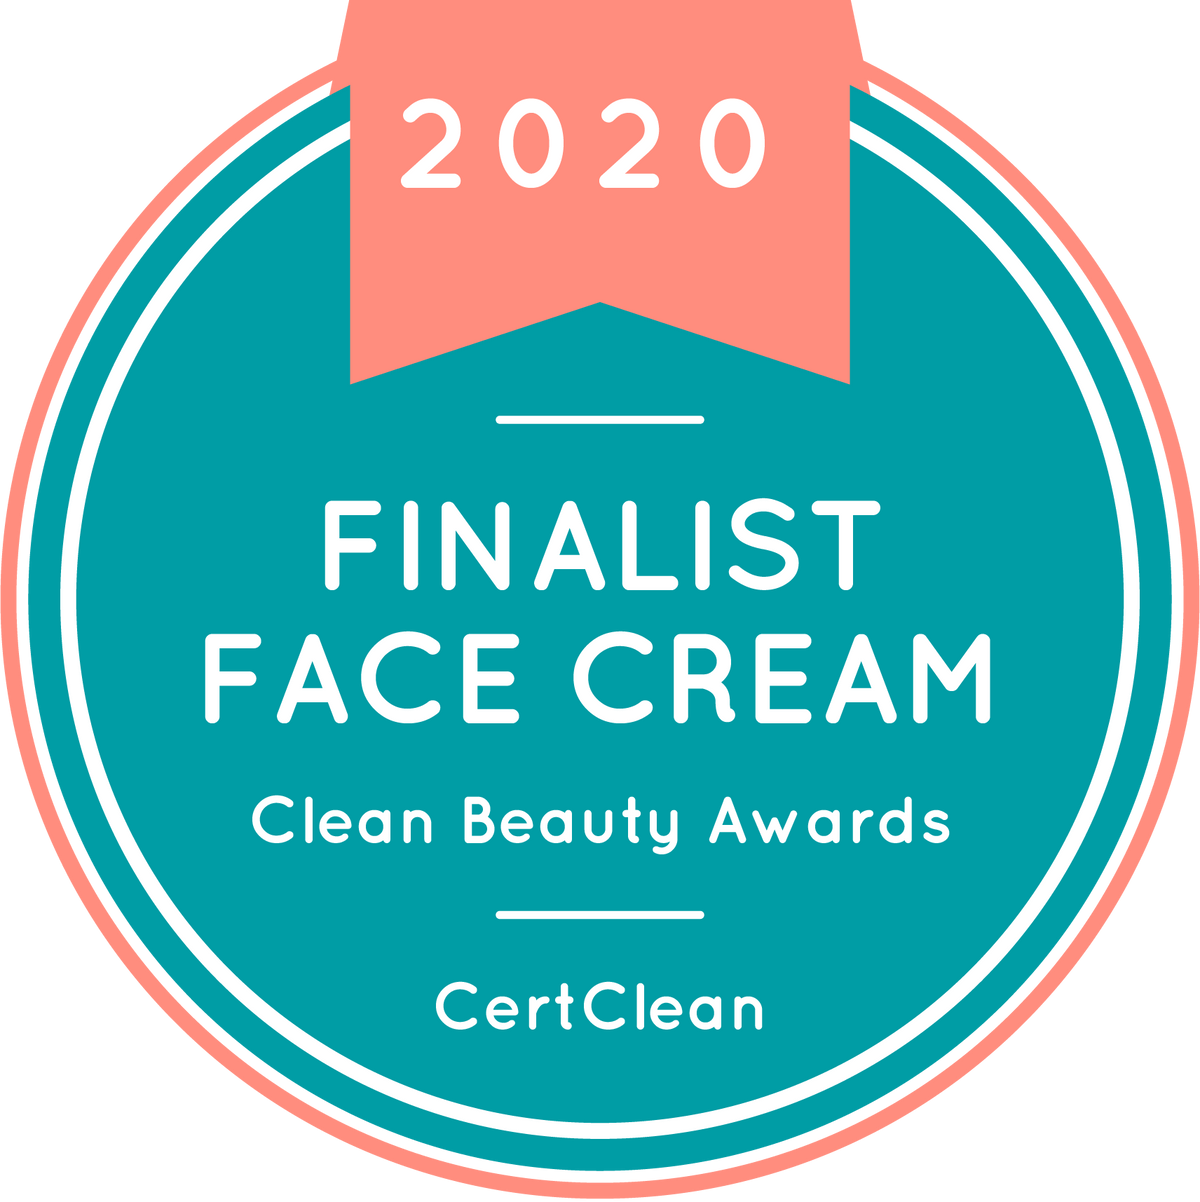 Iremia Skincare&#39;s Protective Cream is a Finalist in the 2020 Clean Beauty Awards for Best Face Cream.